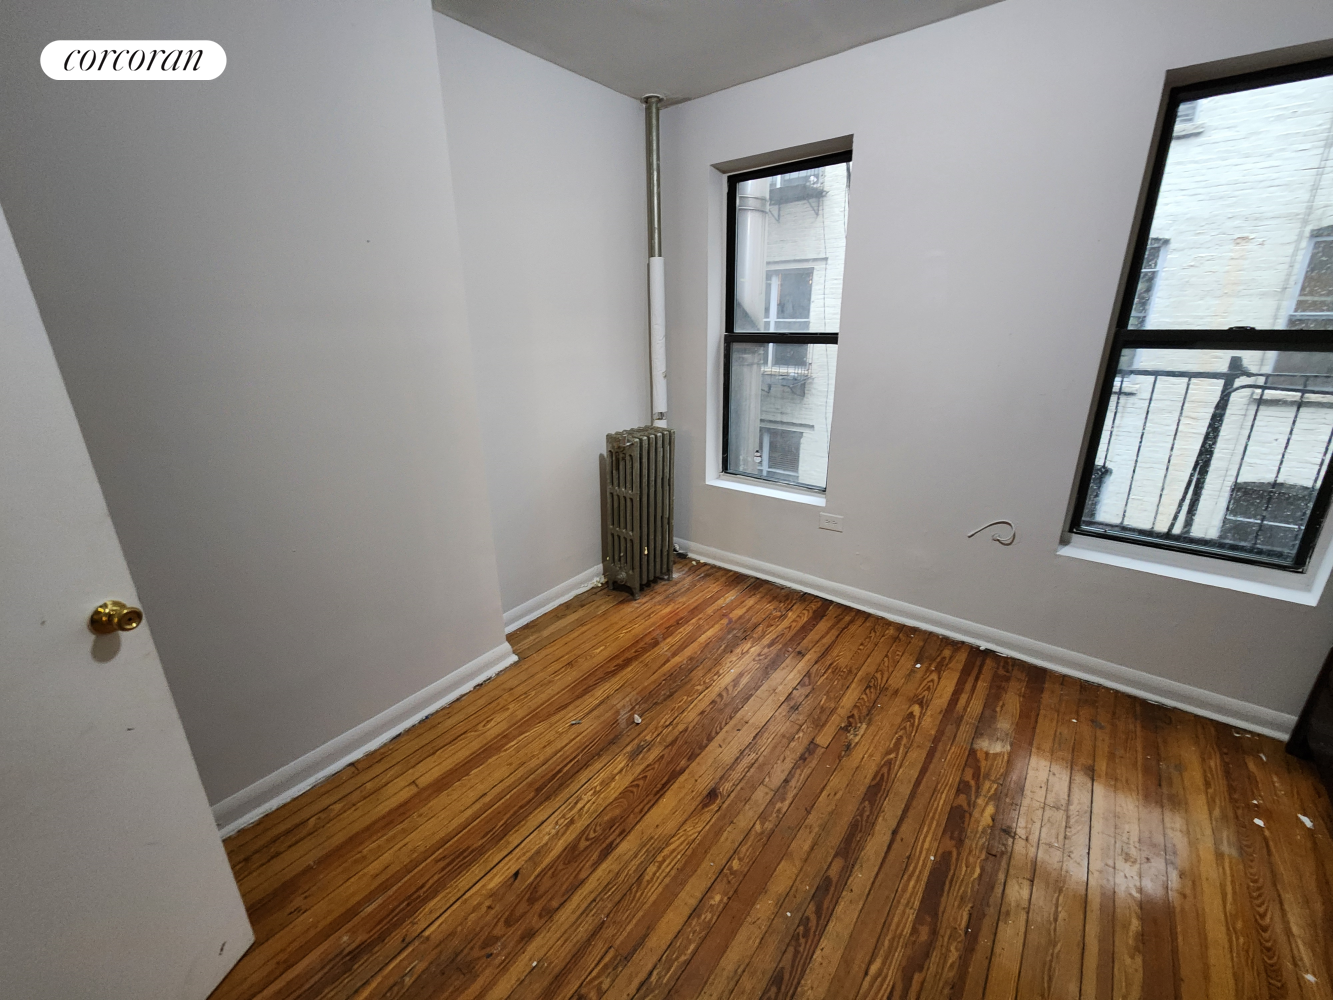 265 West 146th Street 12, Central Harlem, Upper Manhattan, NYC - 1 Bedrooms  
1 Bathrooms  
3 Rooms - 